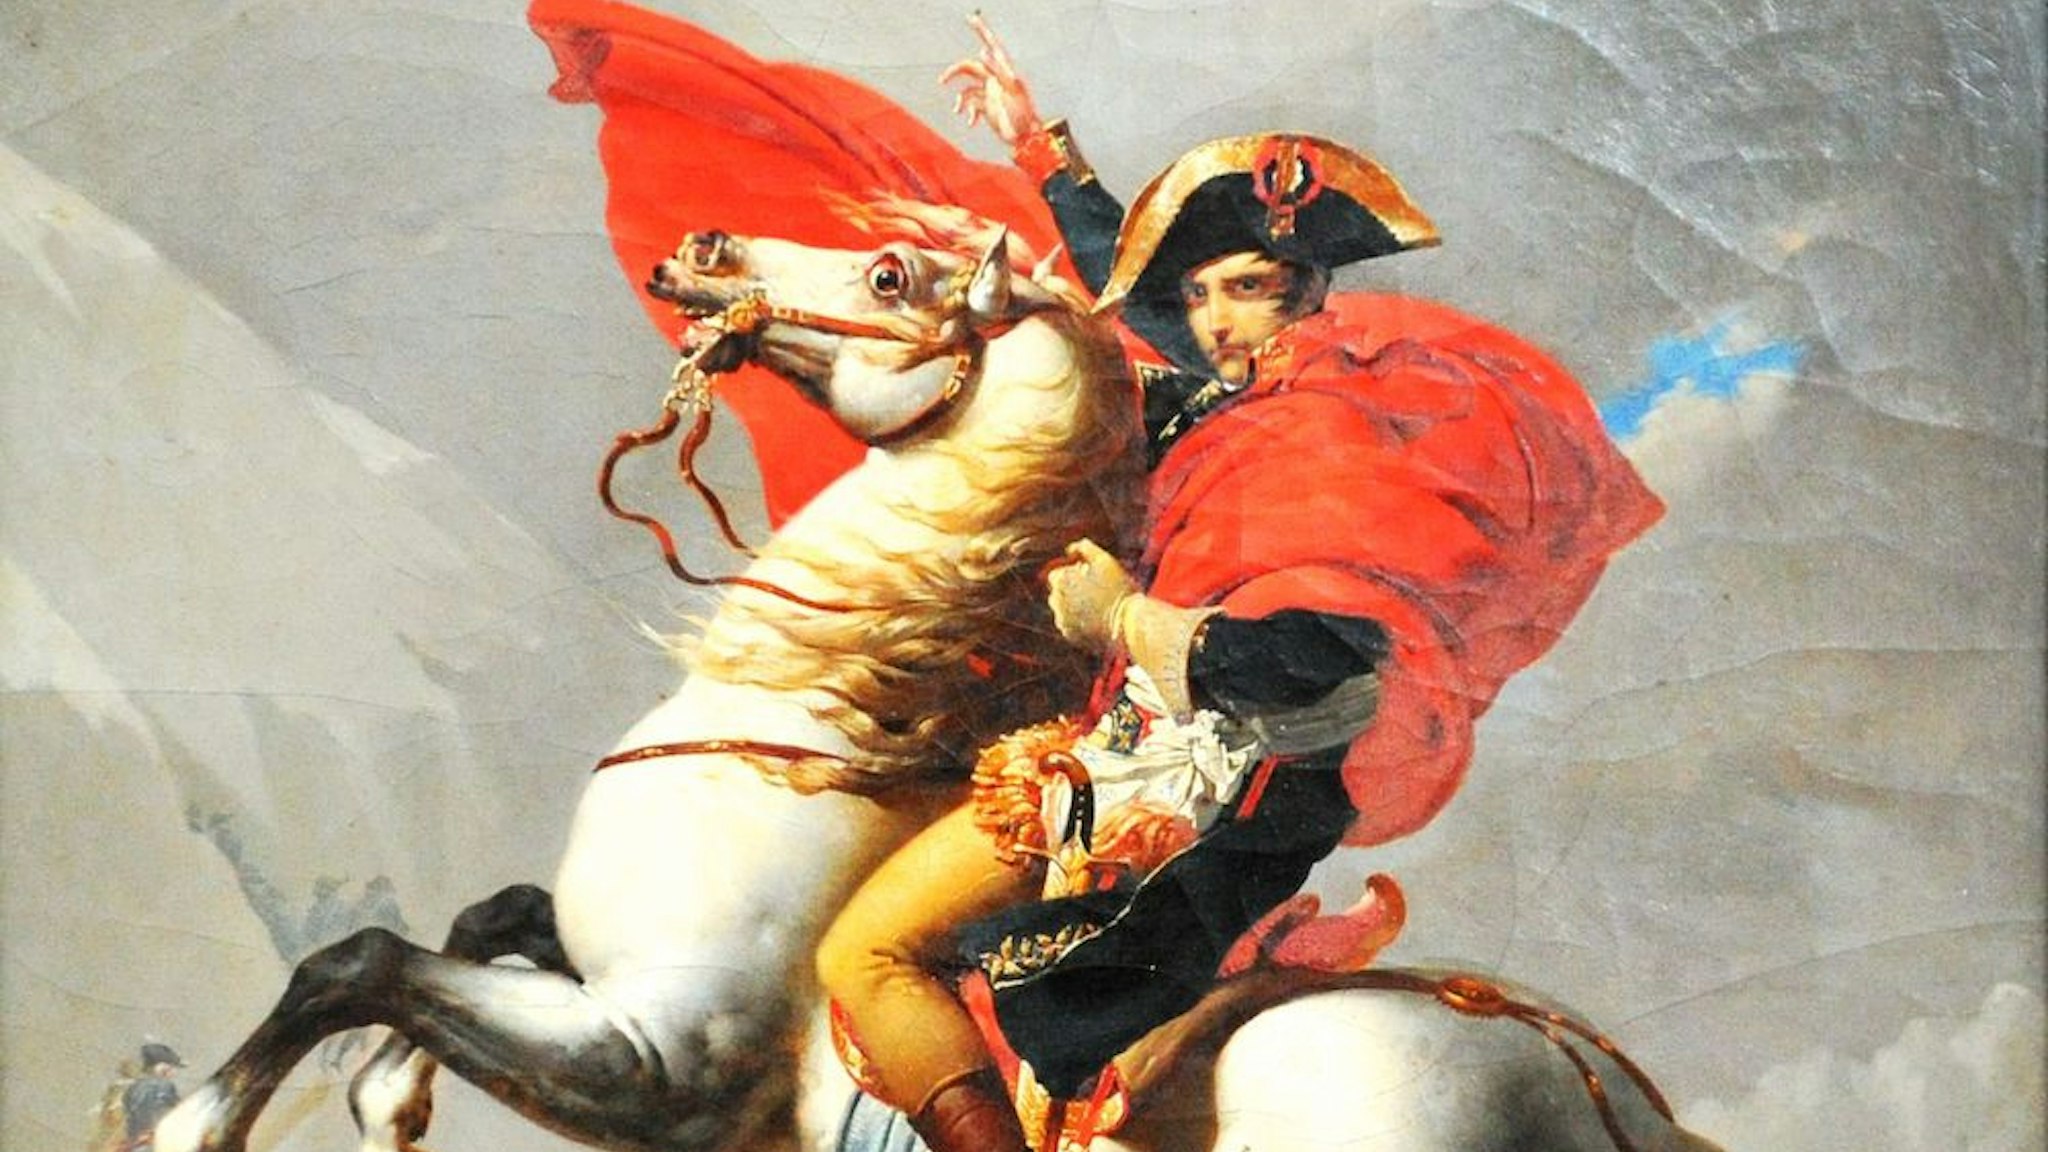 Workers present the oil painting of Napoleon Bonaparte Crossing the Alps by the French artist Jacques-Louis David for an art show featuring the French emporer in Qingdao in east China's Shandong province Tuesday, Aug. 04, 2020. Nearly 200 artifacts, most of which lent from French collector Pierre Jean Chalencion, will be shown till mid-November.